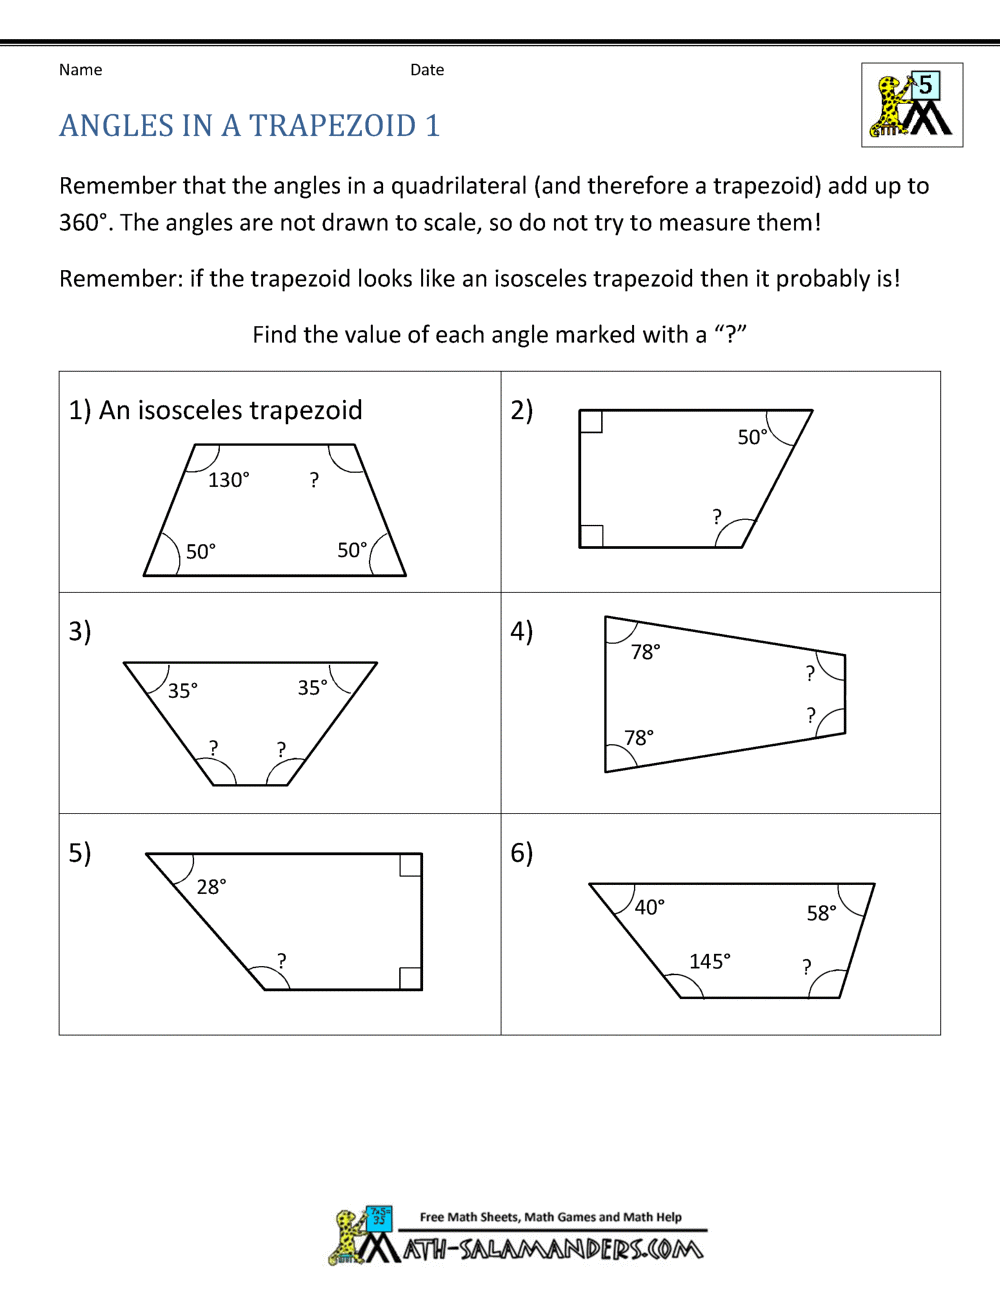 22th Grade Geometry With Finding Missing Angles Worksheet